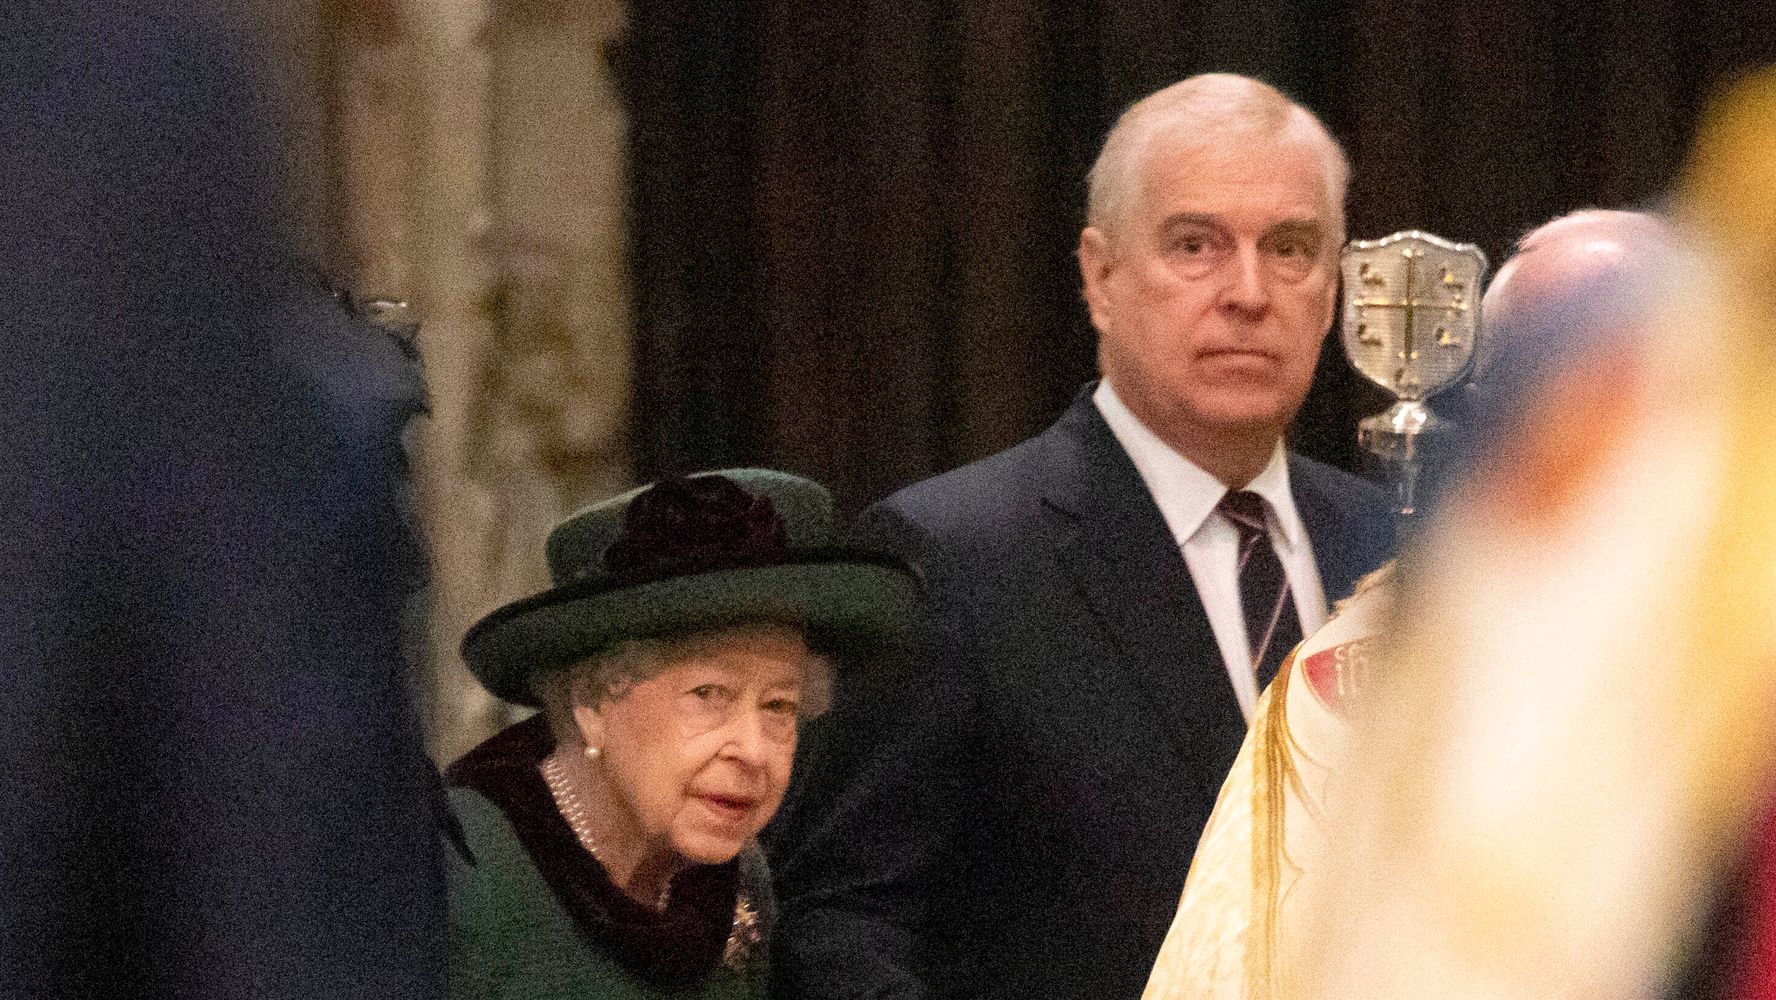 Queen Elizabeth Gets Escorted By Prince Andrew At Prince Philip Memorial Service thumbnail